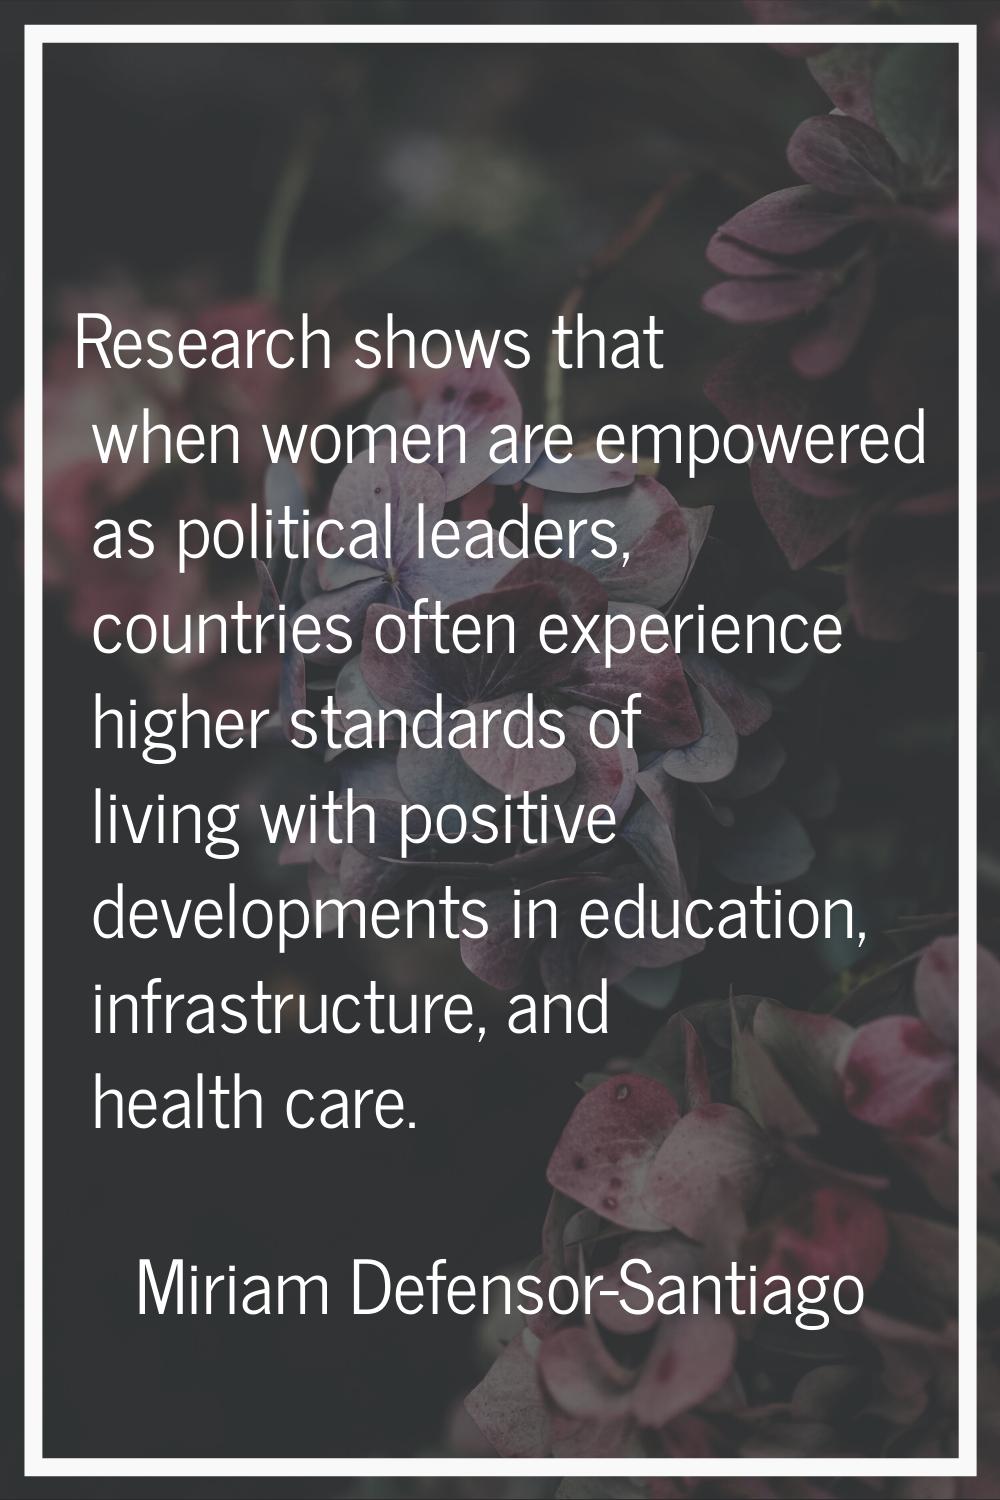 Research shows that when women are empowered as political leaders, countries often experience highe